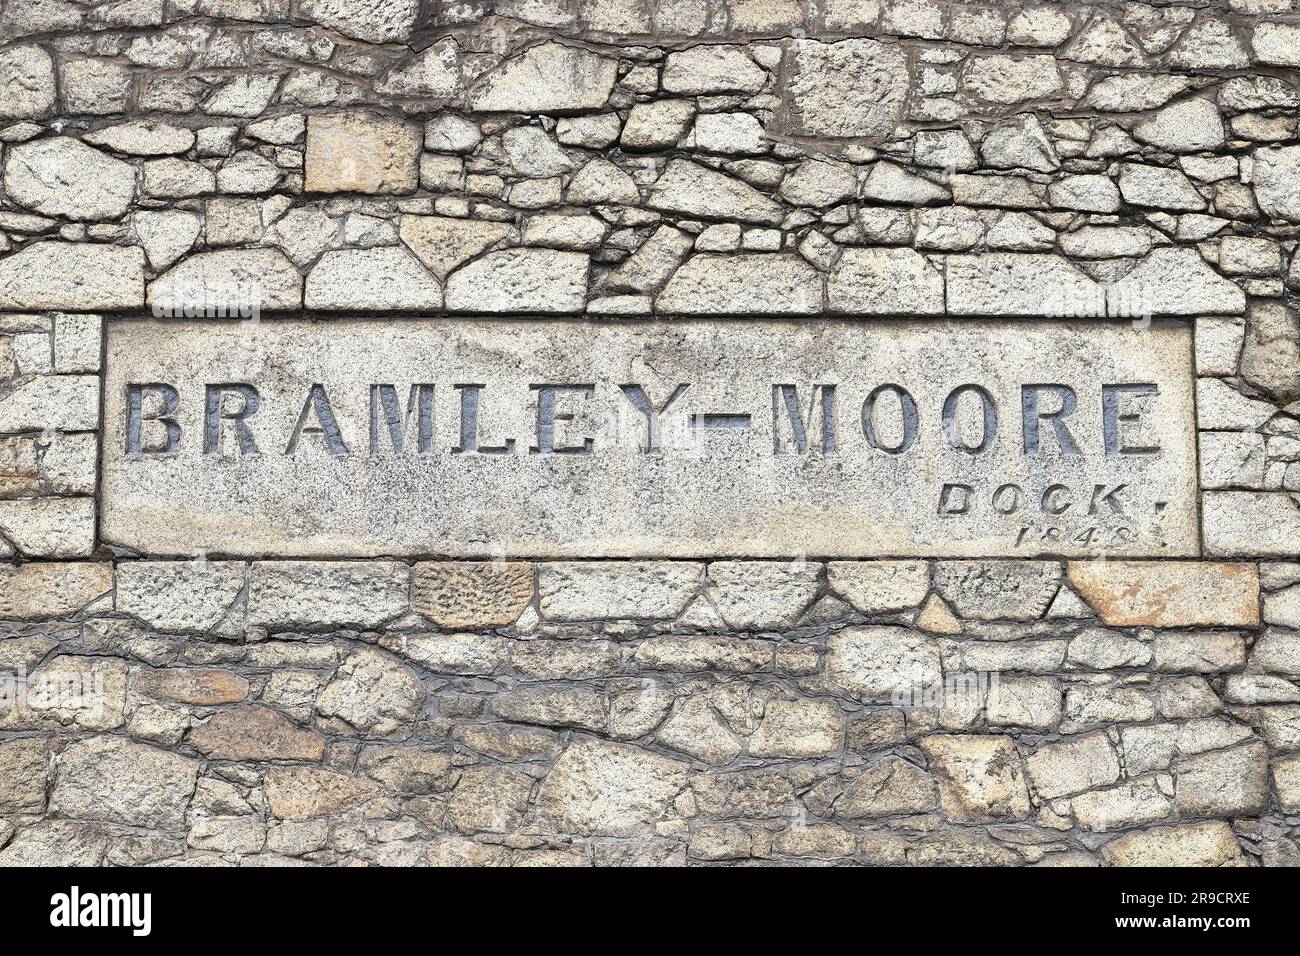 An engraved stone outside Bramley Moore dock on the Liverpool waterfront. The dock is to be the new home of Everton Football Club. Stock Photo